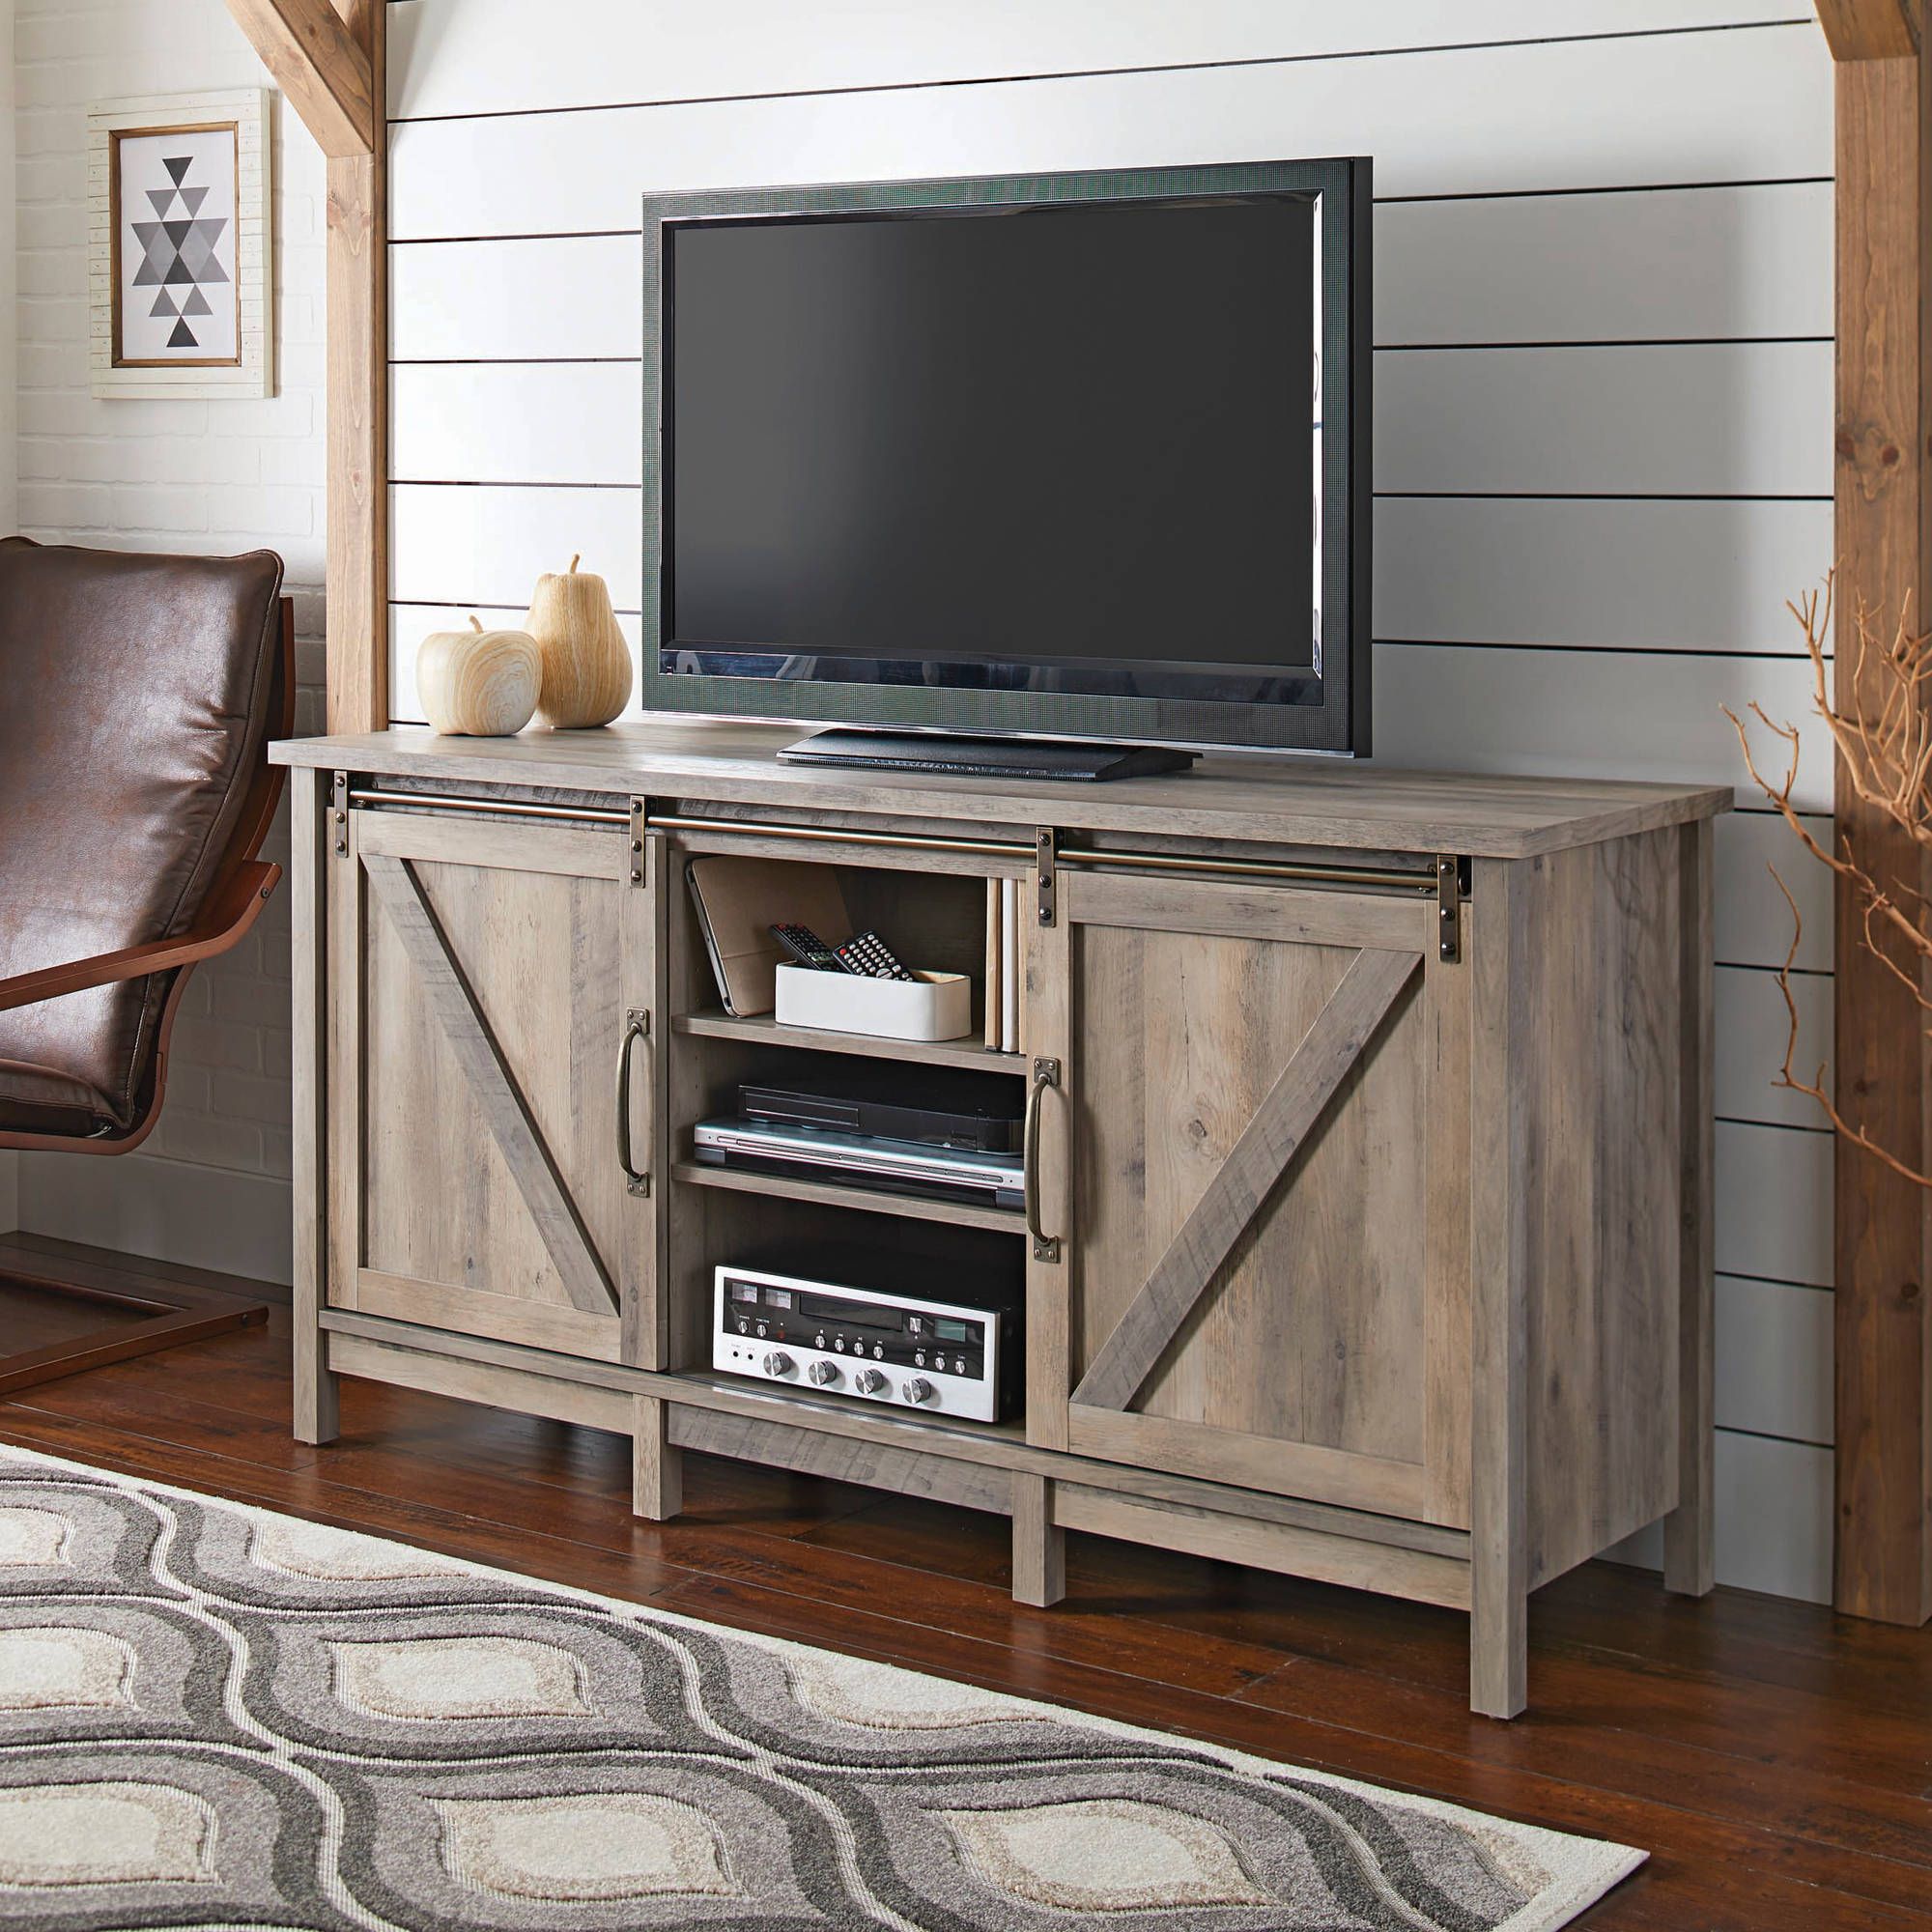 Better Homes And Gardens Modern Farmhouse Tv Stand For Tvs Intended For Robinson Rustic Farmhouse Sliding Barn Door Corner Tv Stands (View 2 of 15)